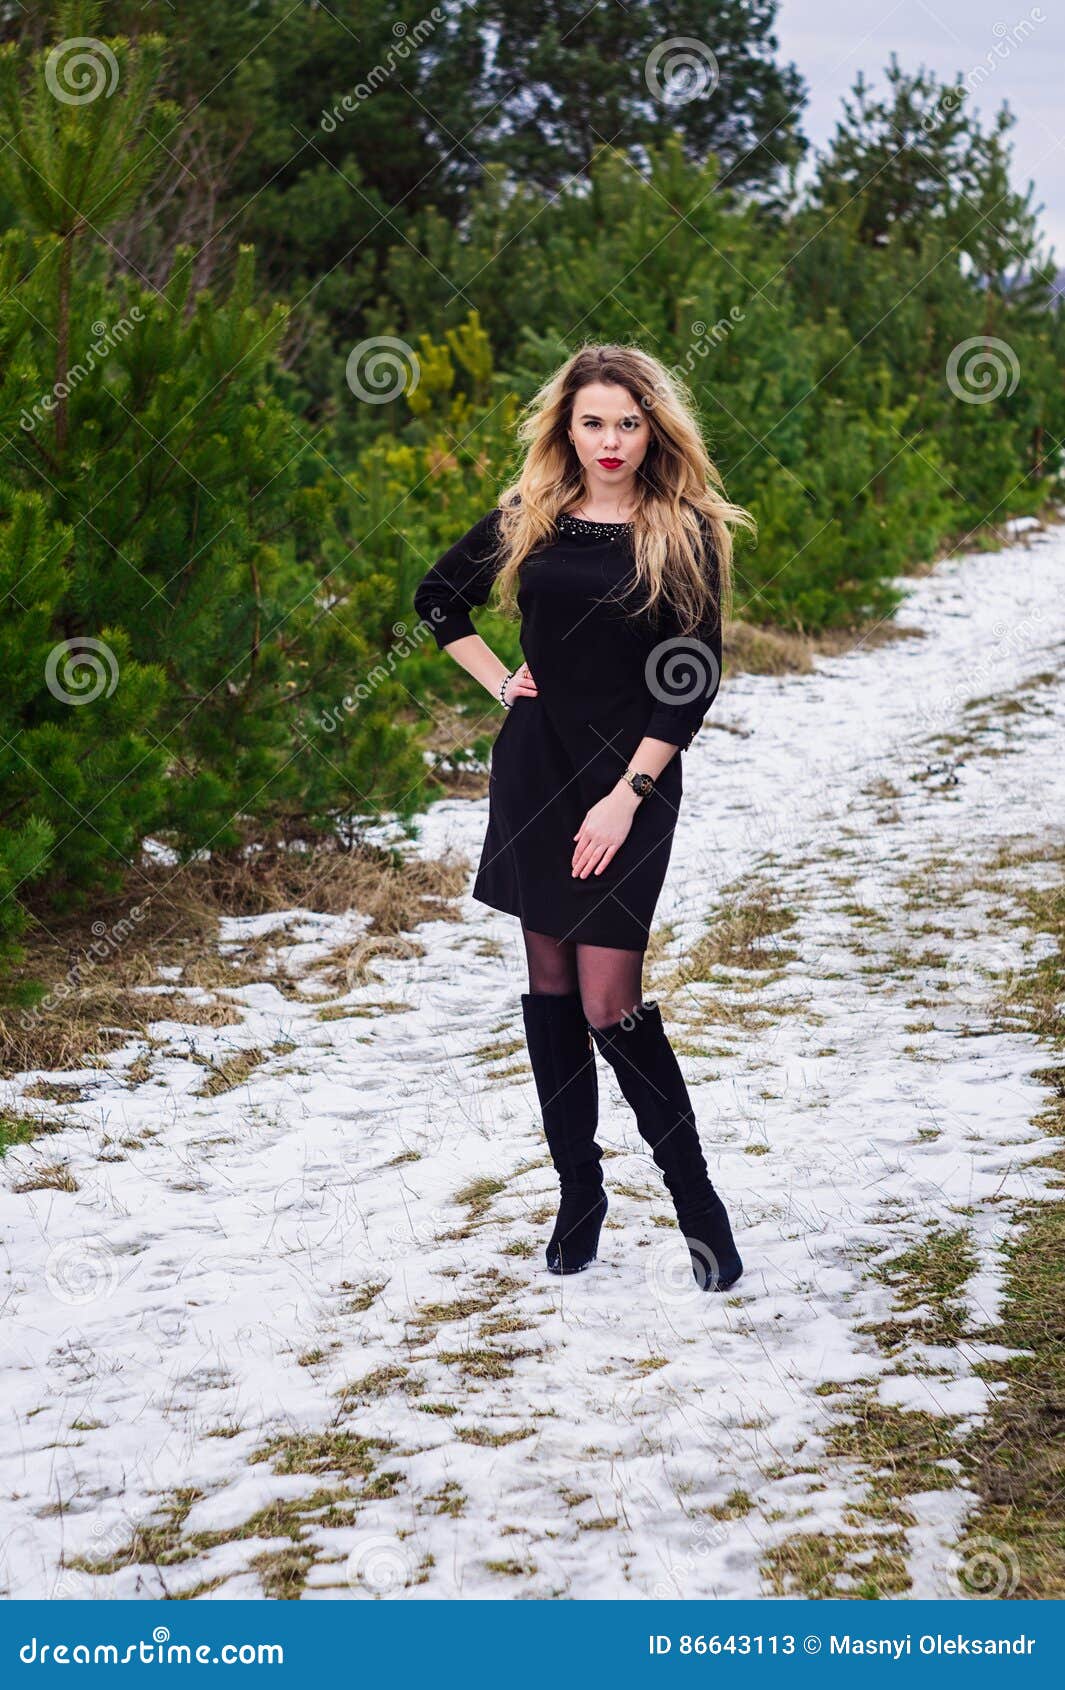 Girl posing in pines stock image. Image of beauty, frosty - 86643113